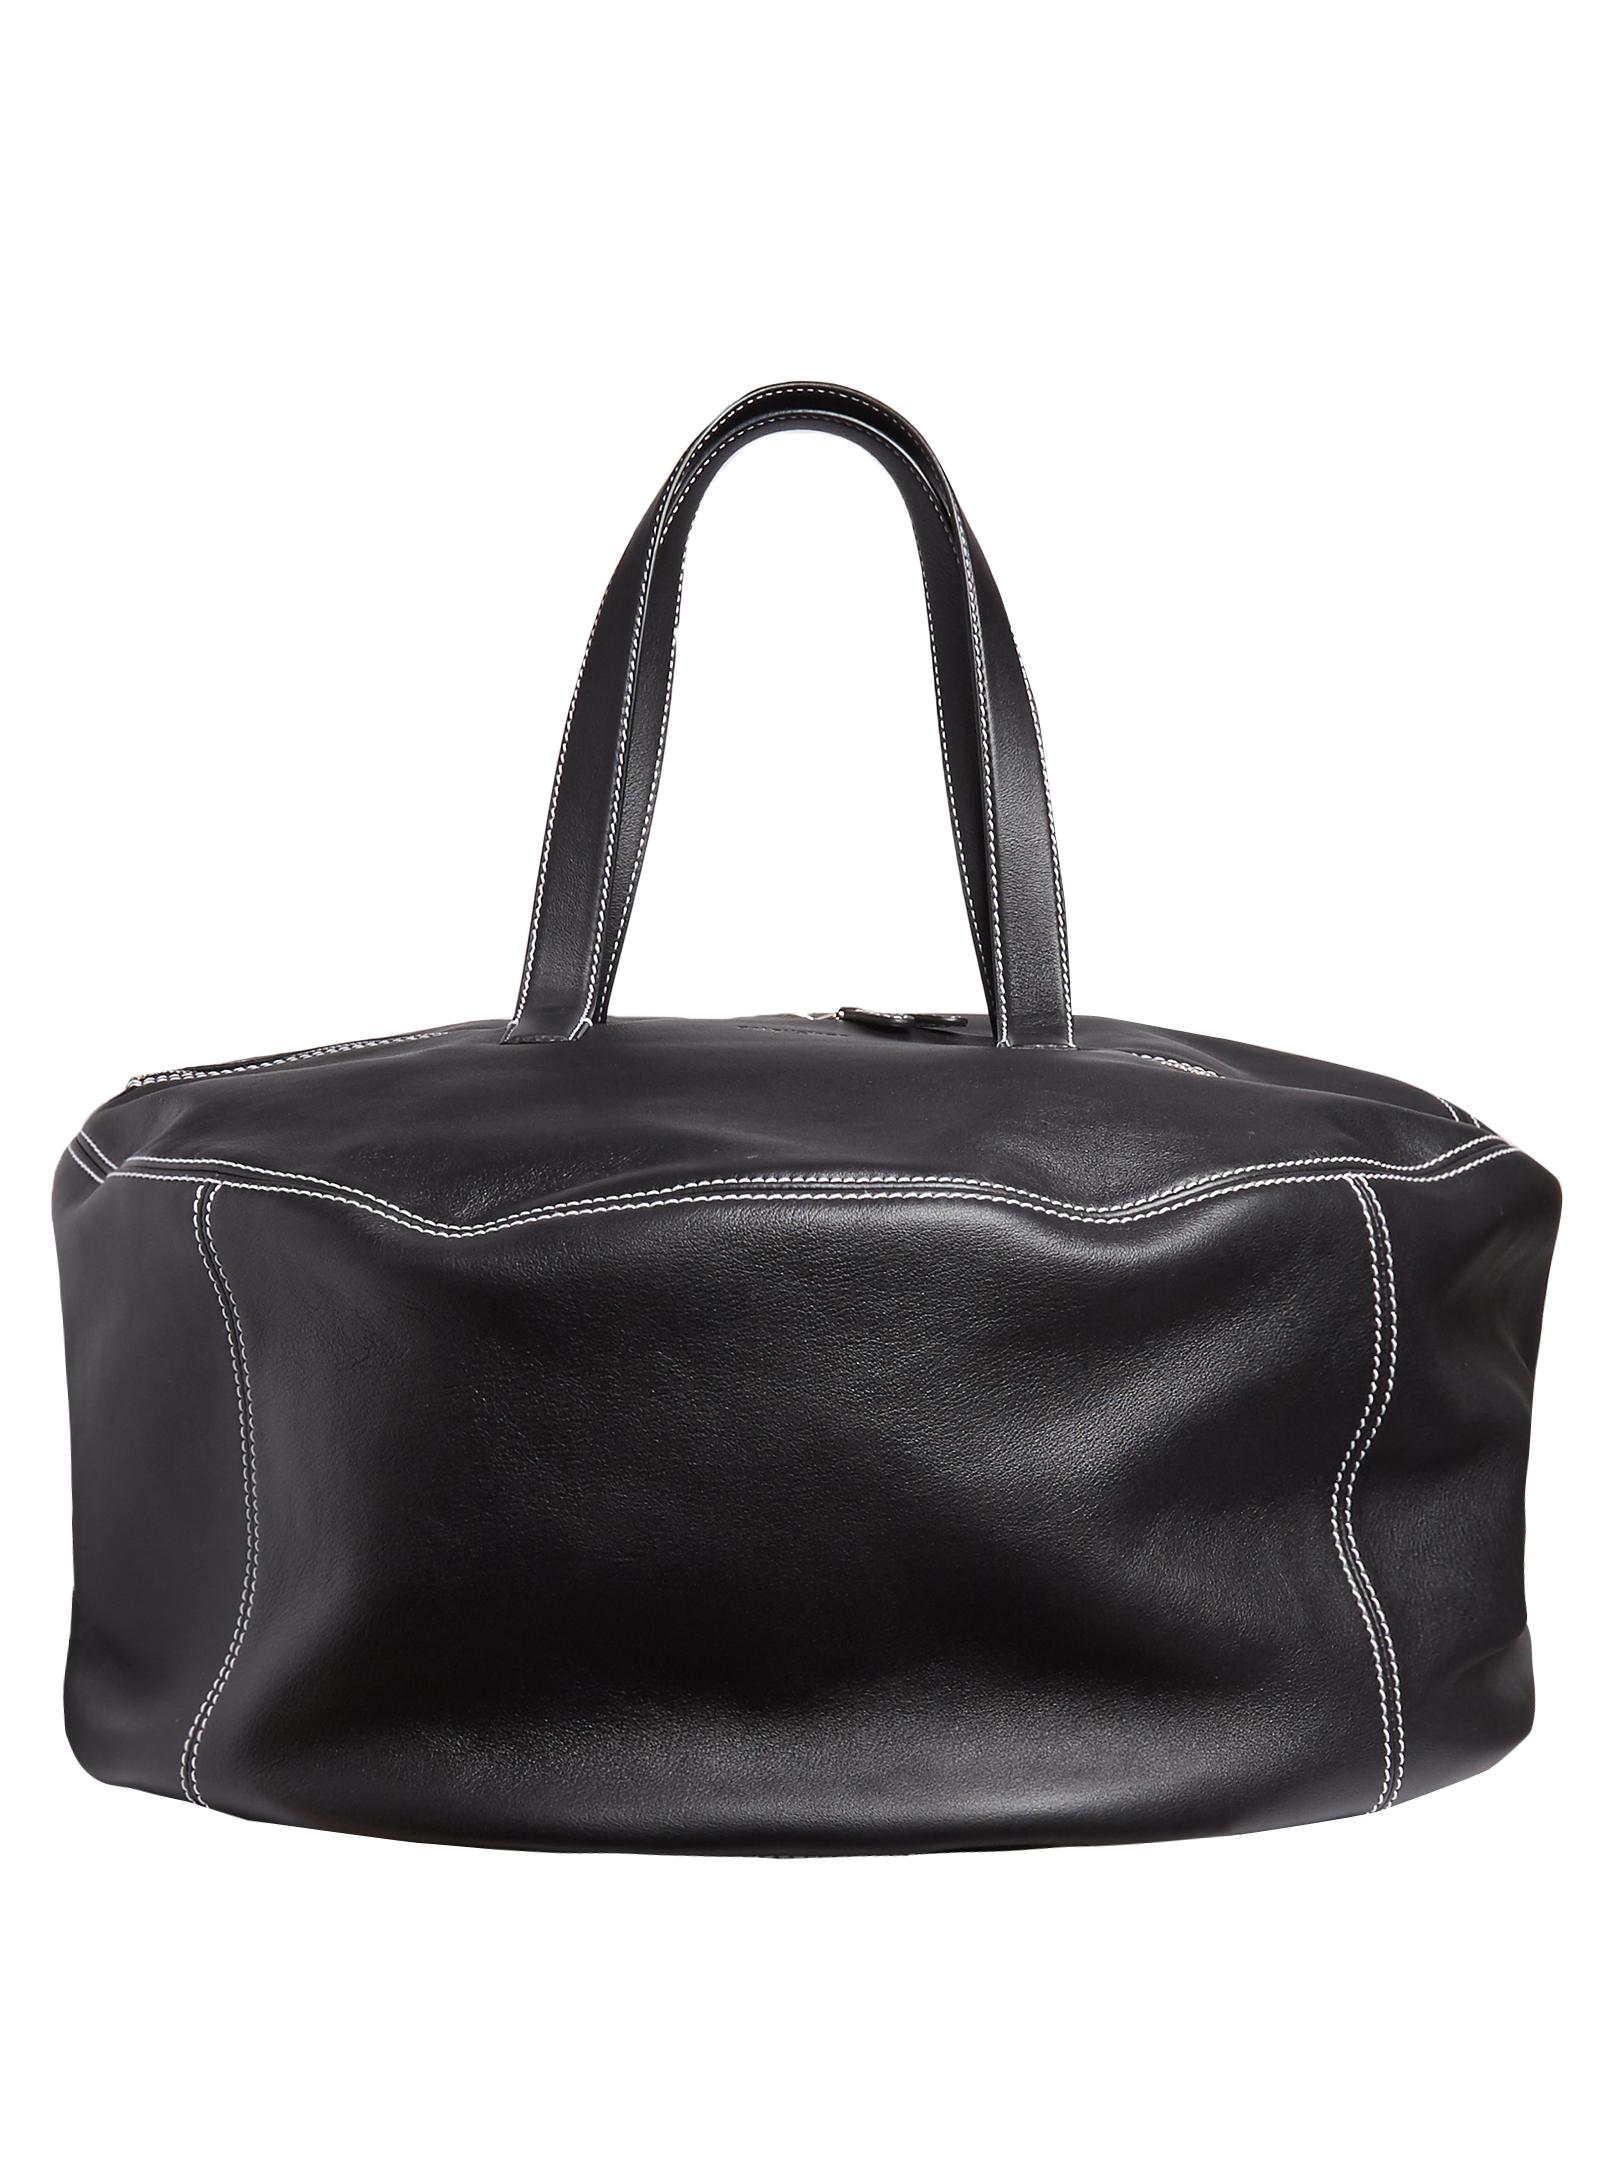 Balenciaga Air Hobo Extra-large Leather Tote in Black | Lyst